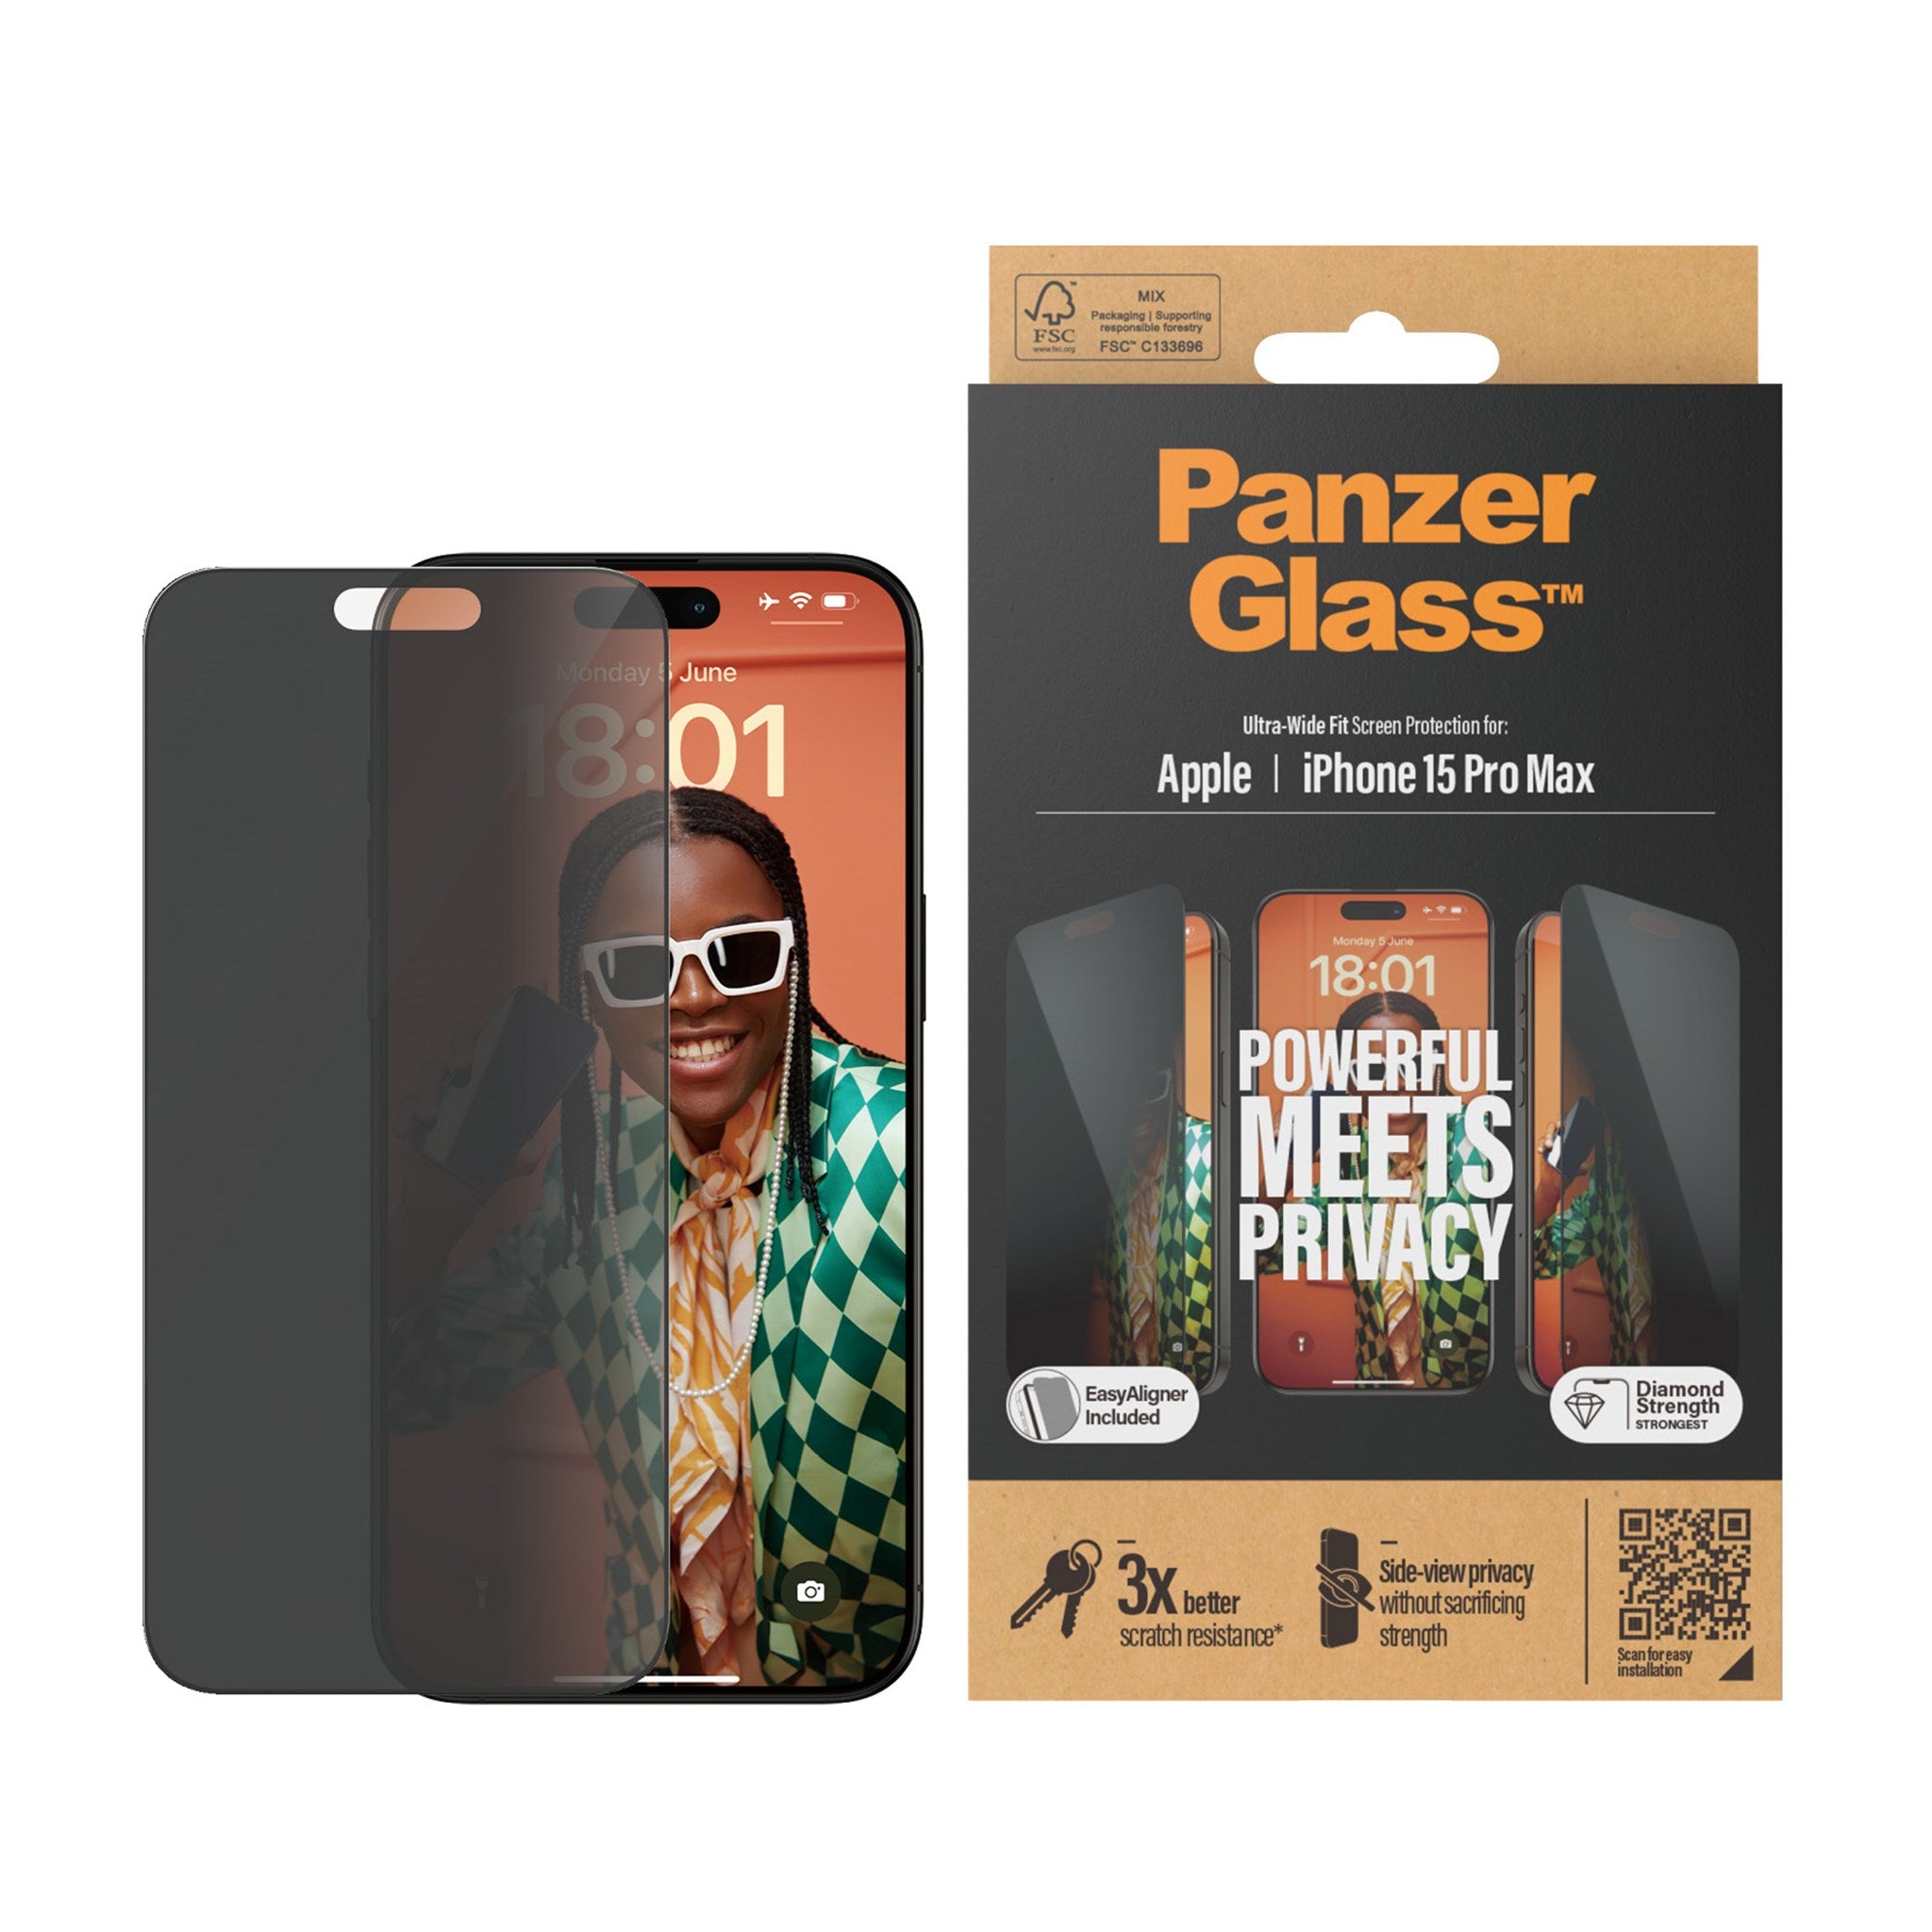 PanzerGlass SAFE Glass Screen Protector for iPhone 15 Pro Max - Vodafone